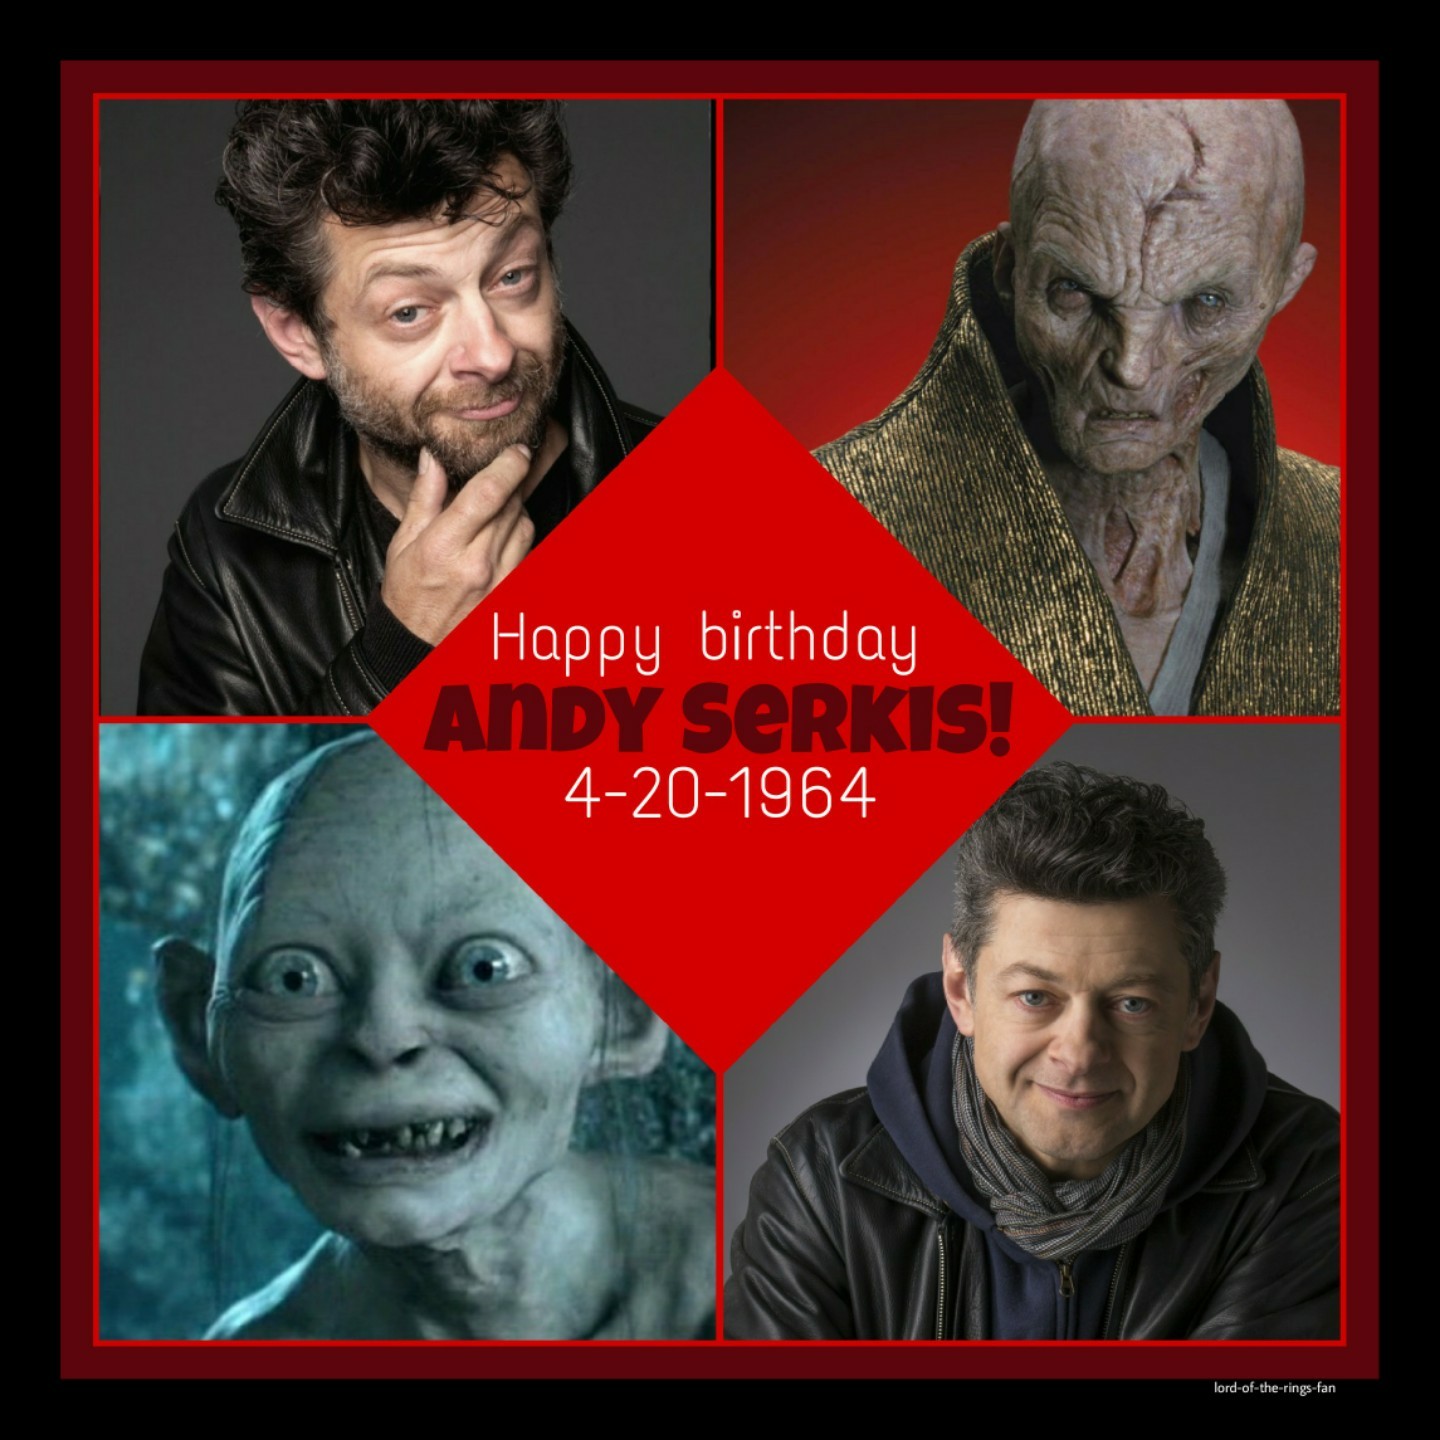 He is so awesome!
#gollum #star wars #lotr #hobbit #snoke #andy serkis